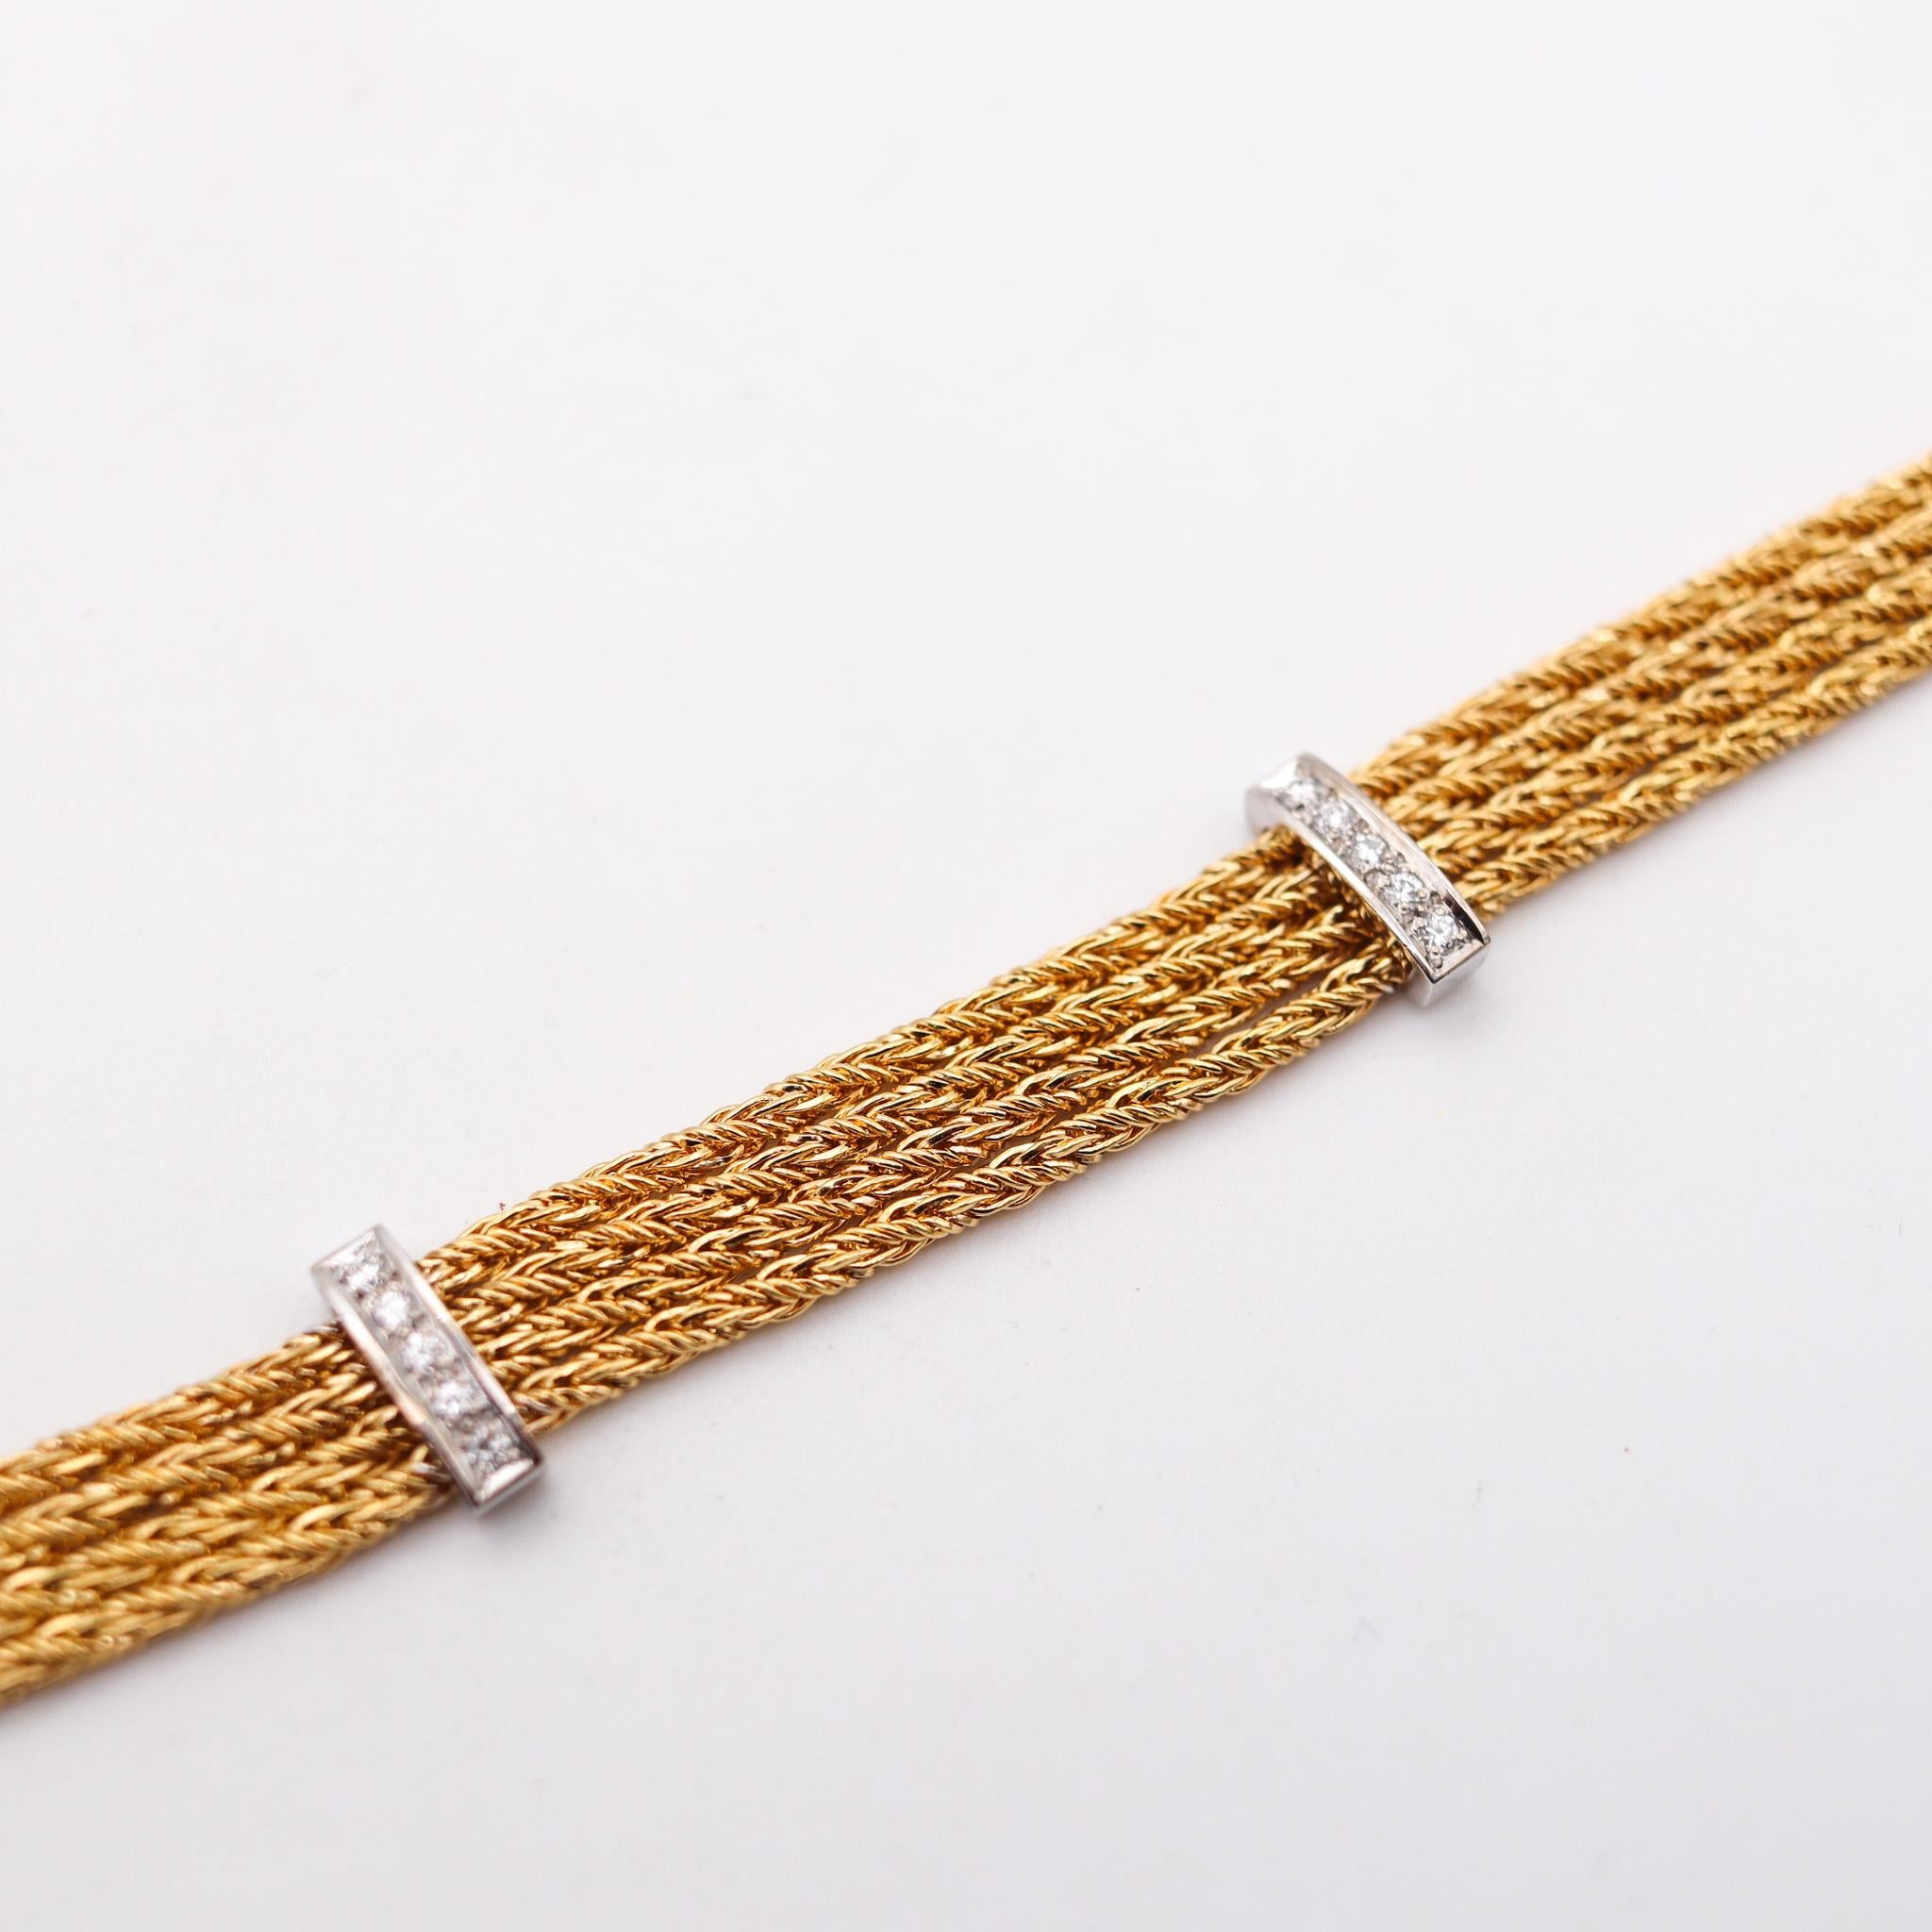 Women's Tiffany & Co. Textured Station Chain Bracelet in 18kt Yellow Gold with Diamonds